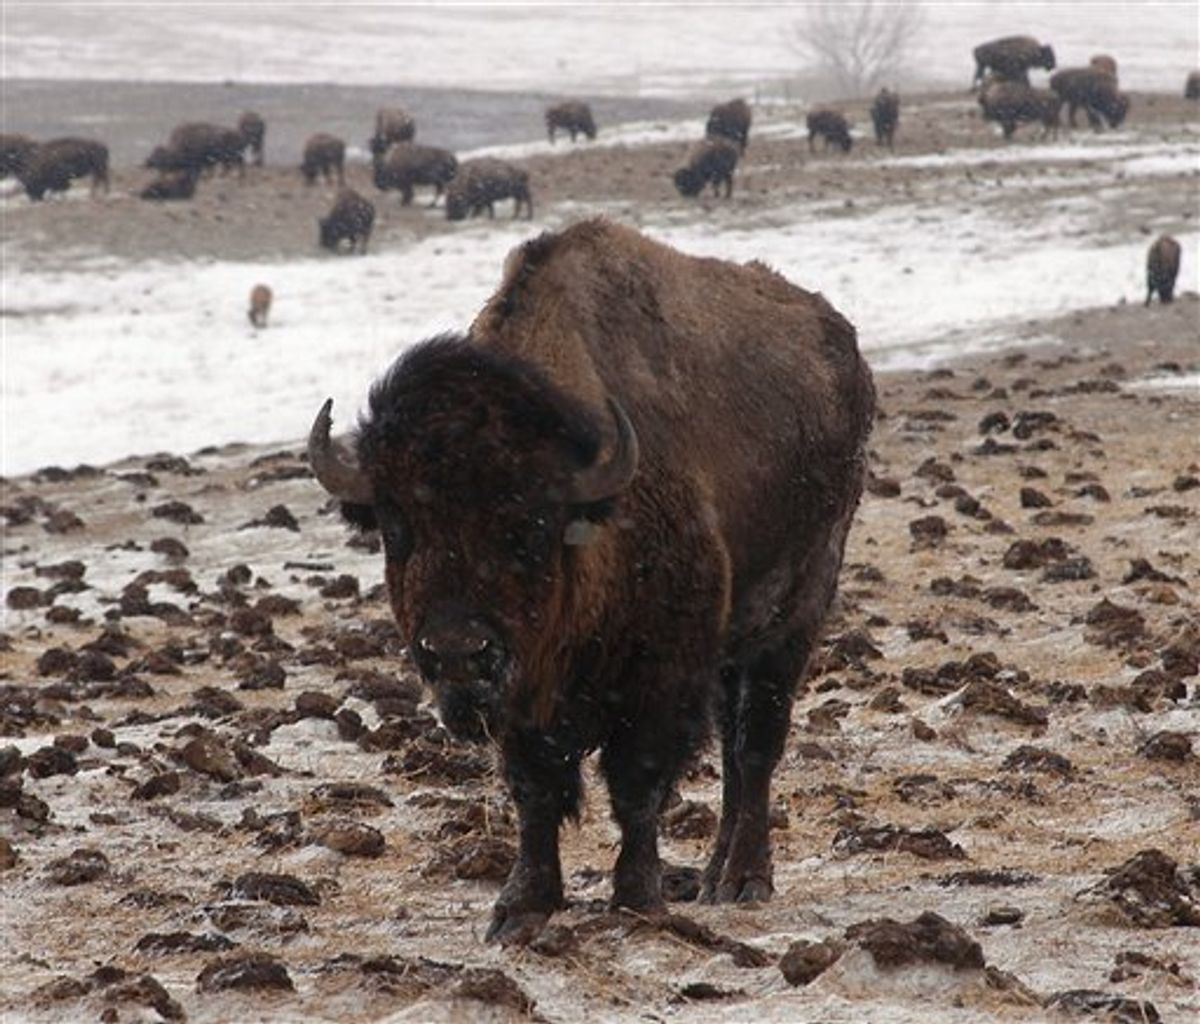 In this Feb. 19, 2011, photo a bison graze in a snow covered pasture at the Wilder buffalo ranch near McLaughlin, S.D.  Corson County, which ordered the animals into the sheriff's care, has spent more than $50,000 providing feed and plowing roads at the ranch, which straddles the North Dakota-South Dakota border. (AP Photo/Doug Dreyer)  (AP)